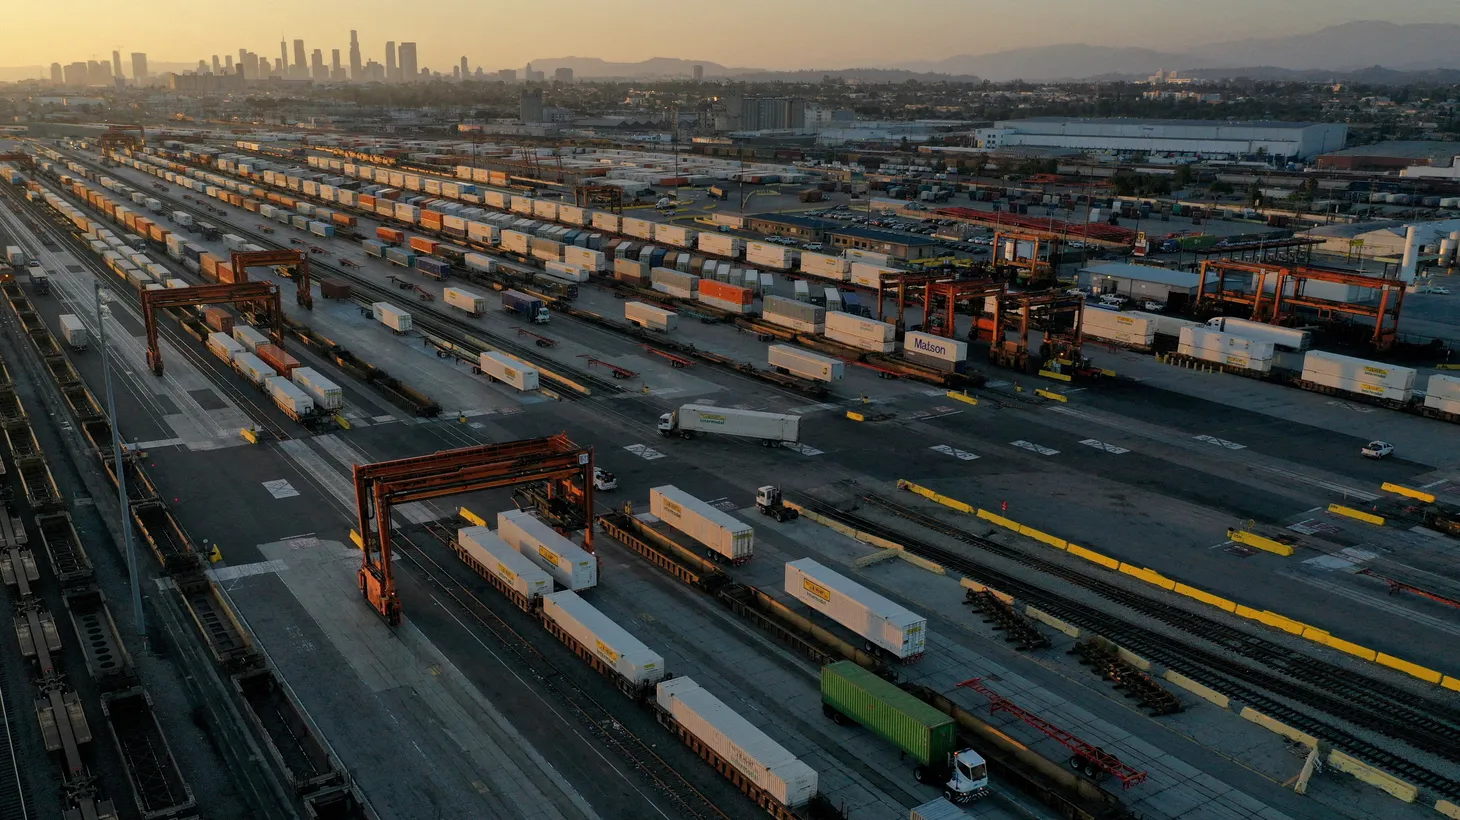 An aerial view shows gantry cranes, shipping containers, and freight railway trains ahead of a possible strike if there is no deal with the rail worker unions, at the Union Pacific Los Angeles (UPLA) Intermodal Facility rail yard in Commerce, California, U.S., September 15, 2022.